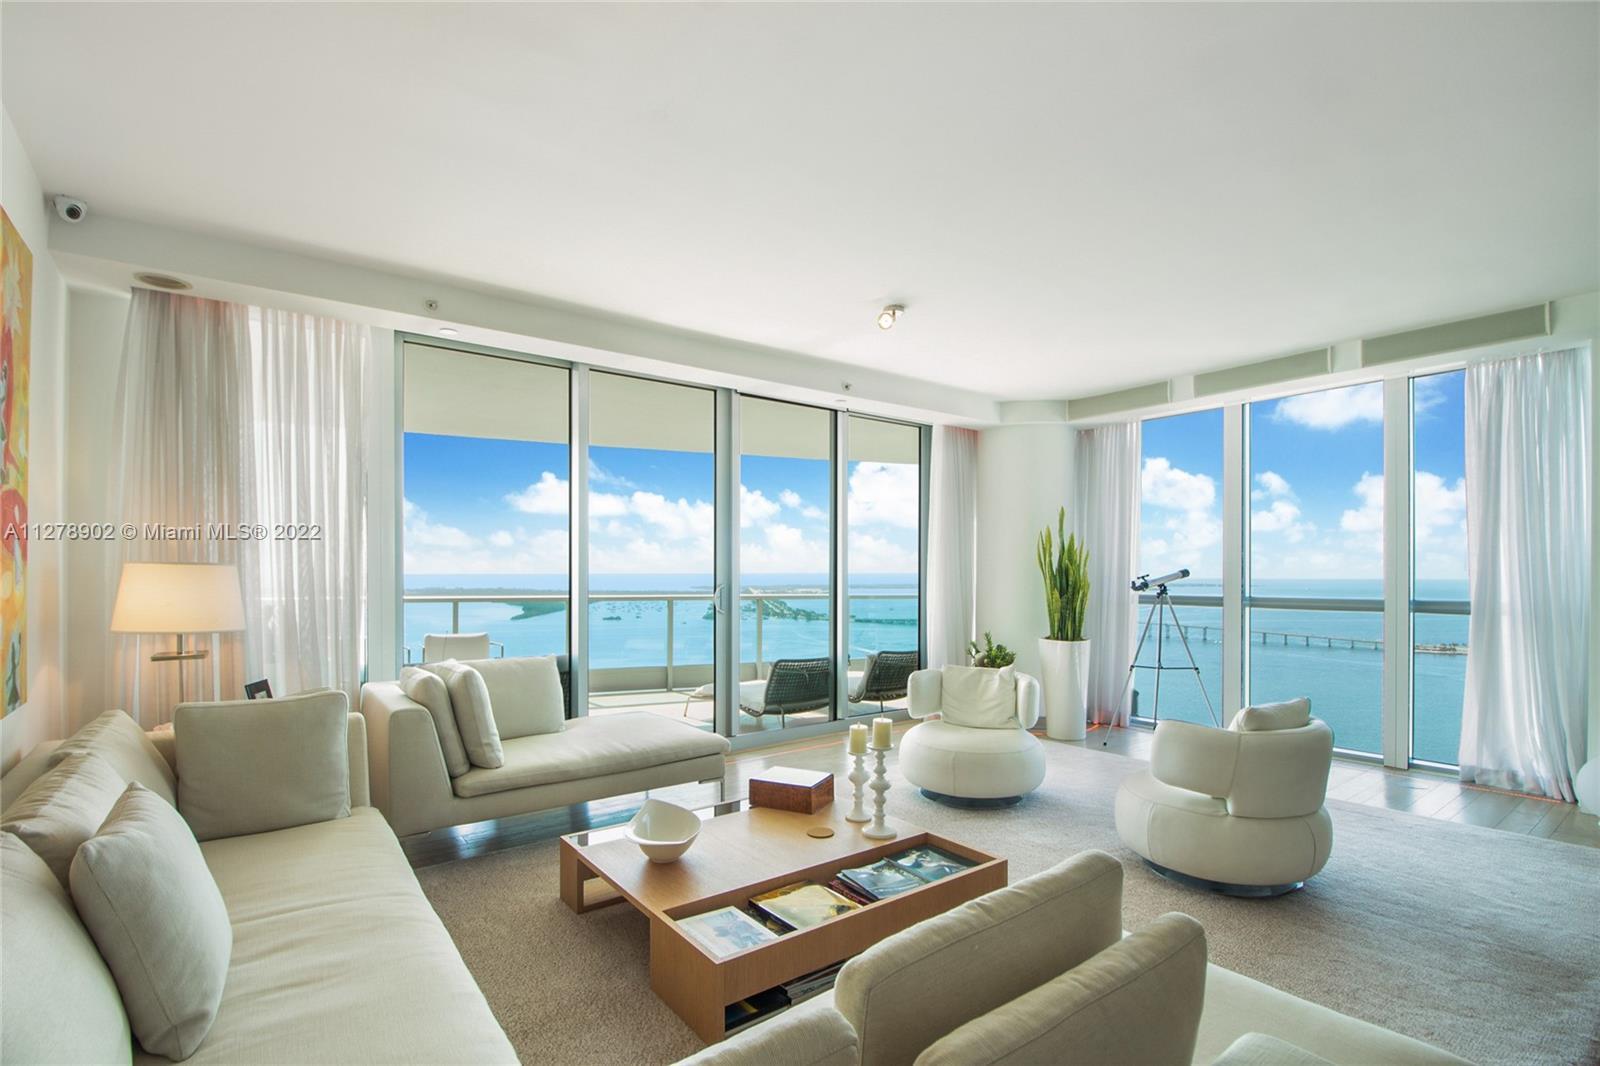 Spectacular wide bay and ocean views from this spacious 4BR/4.5BA SE corner unit at Jade Brickell. E